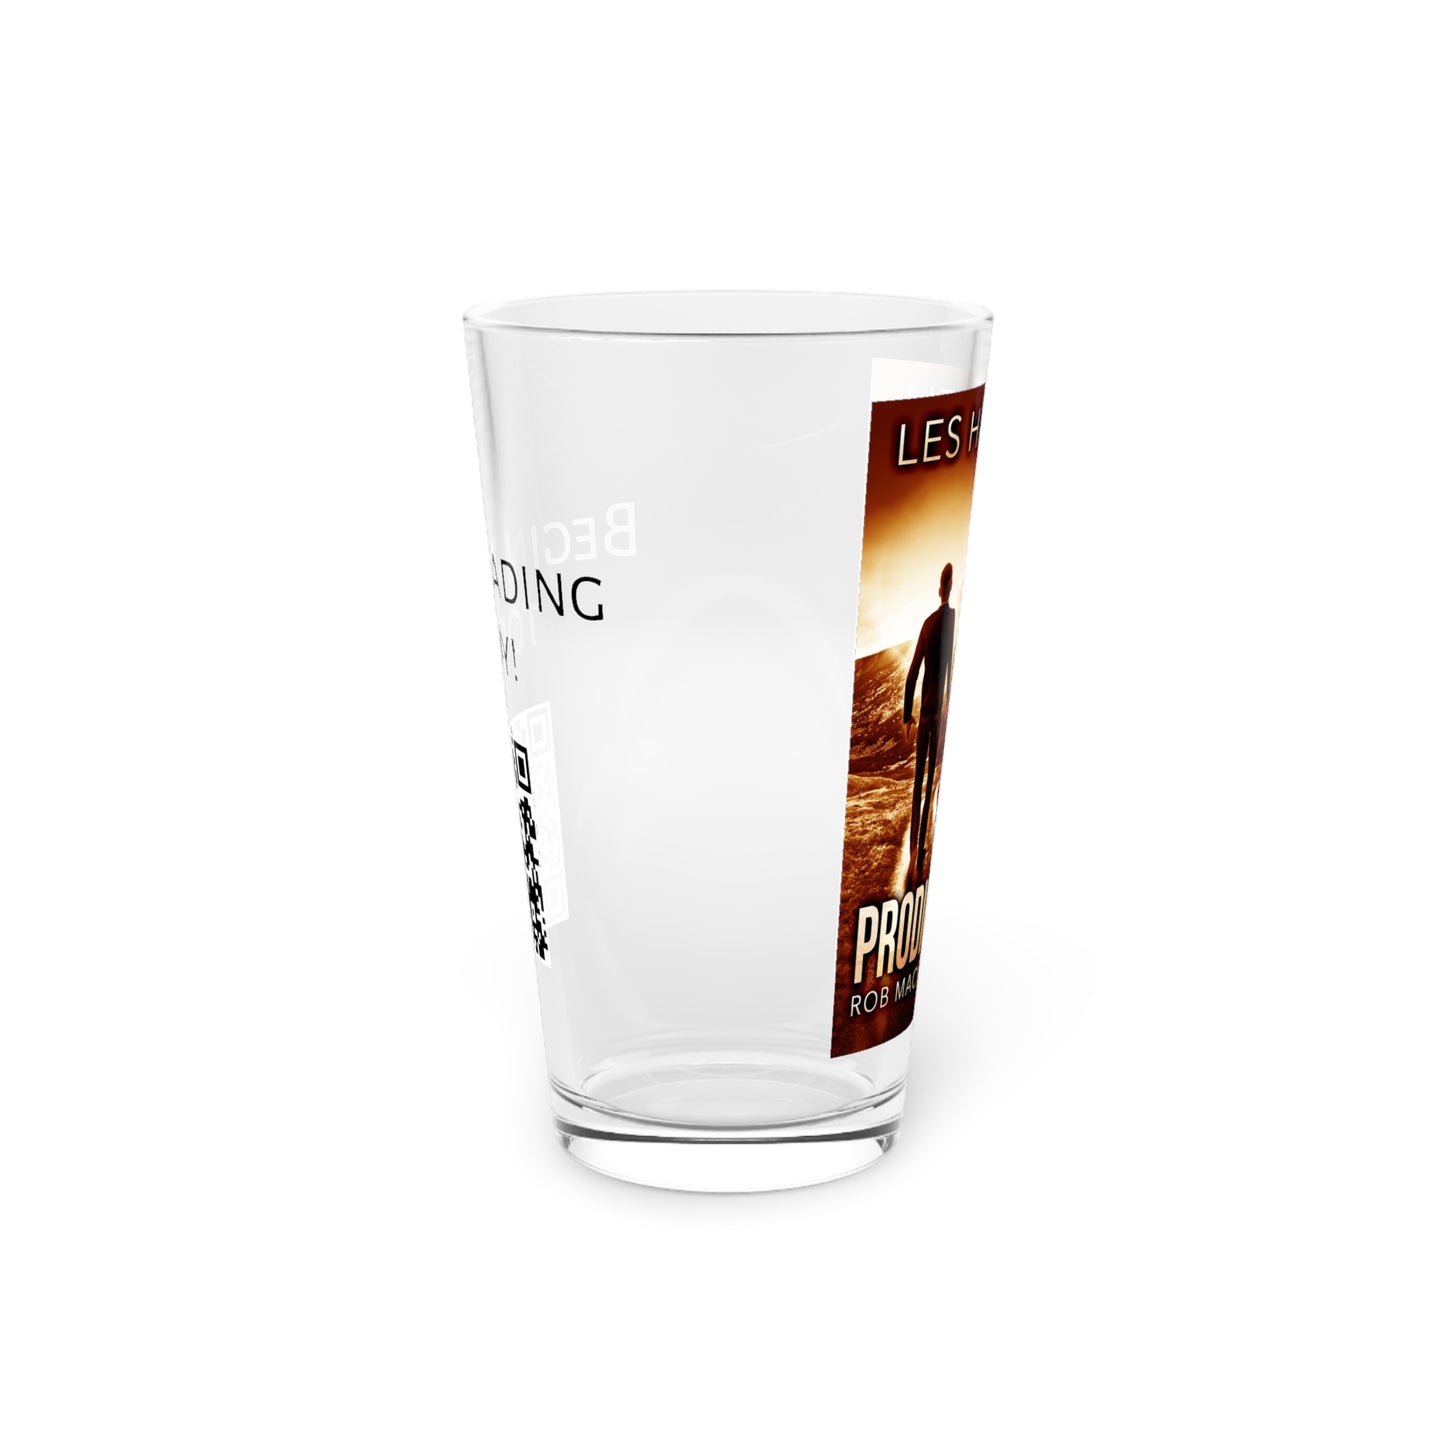 The Prodigal Son - Pint Glass